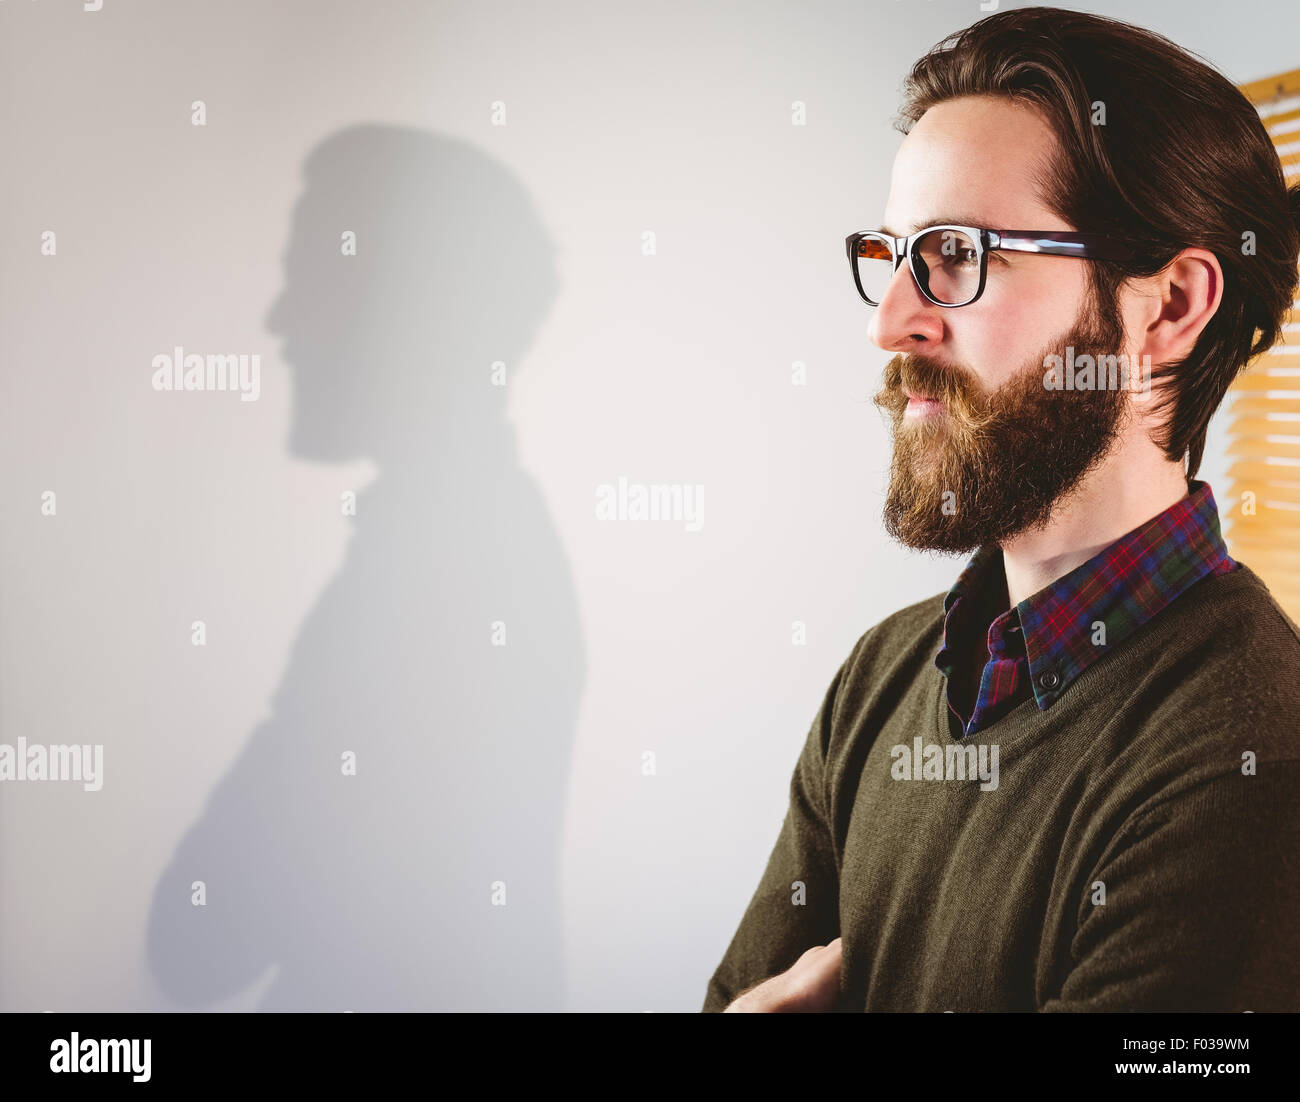 Hipster businessman in side profile Stock Photo